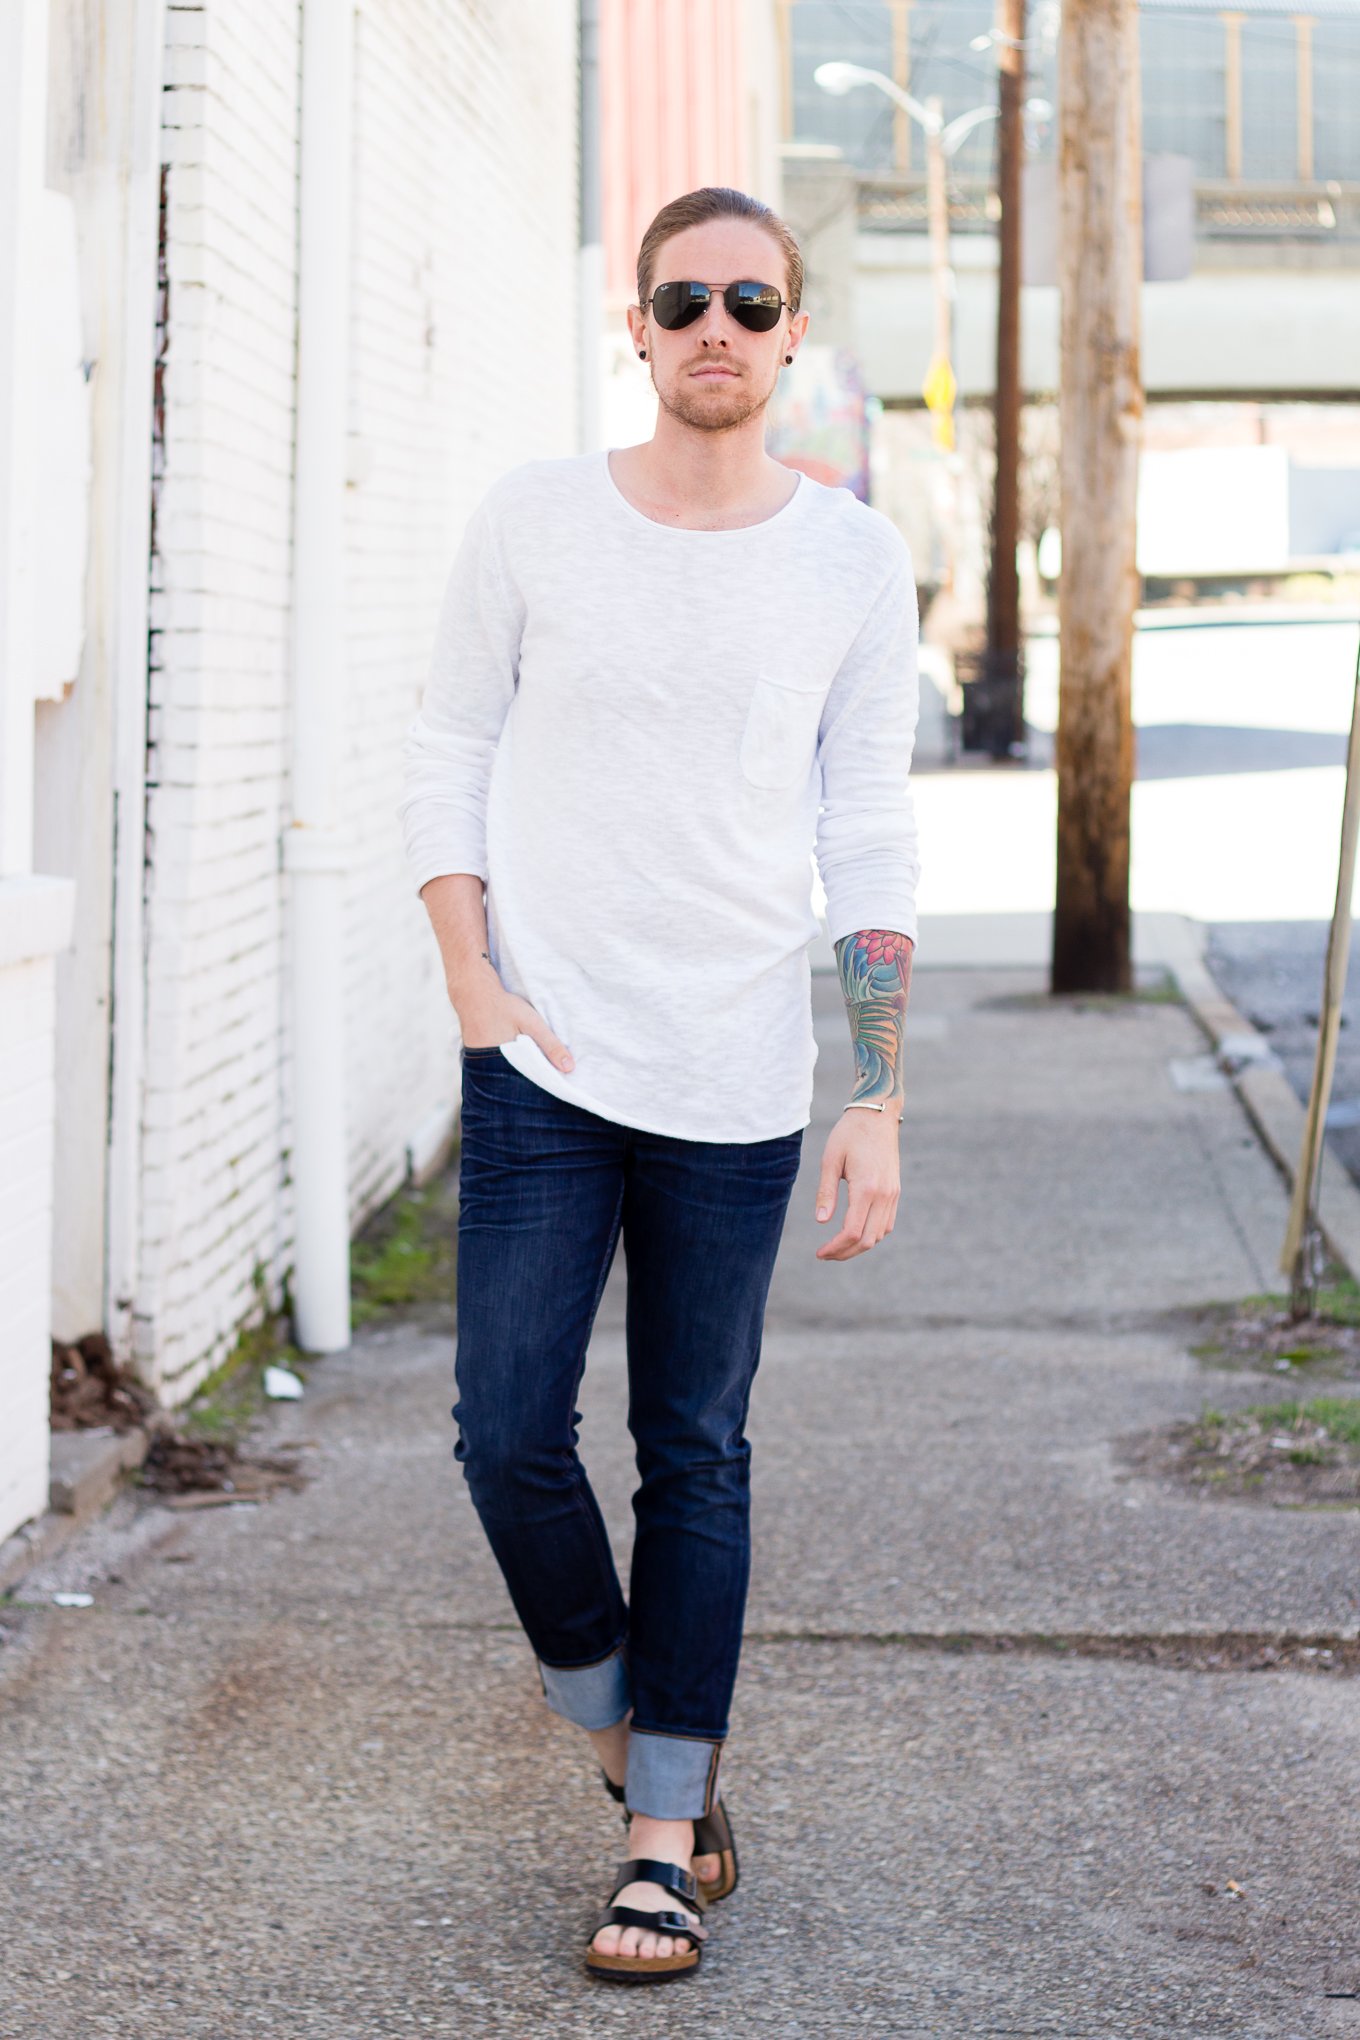 H&M Shirt + DSTLD Jeans on The Kentucky Gent